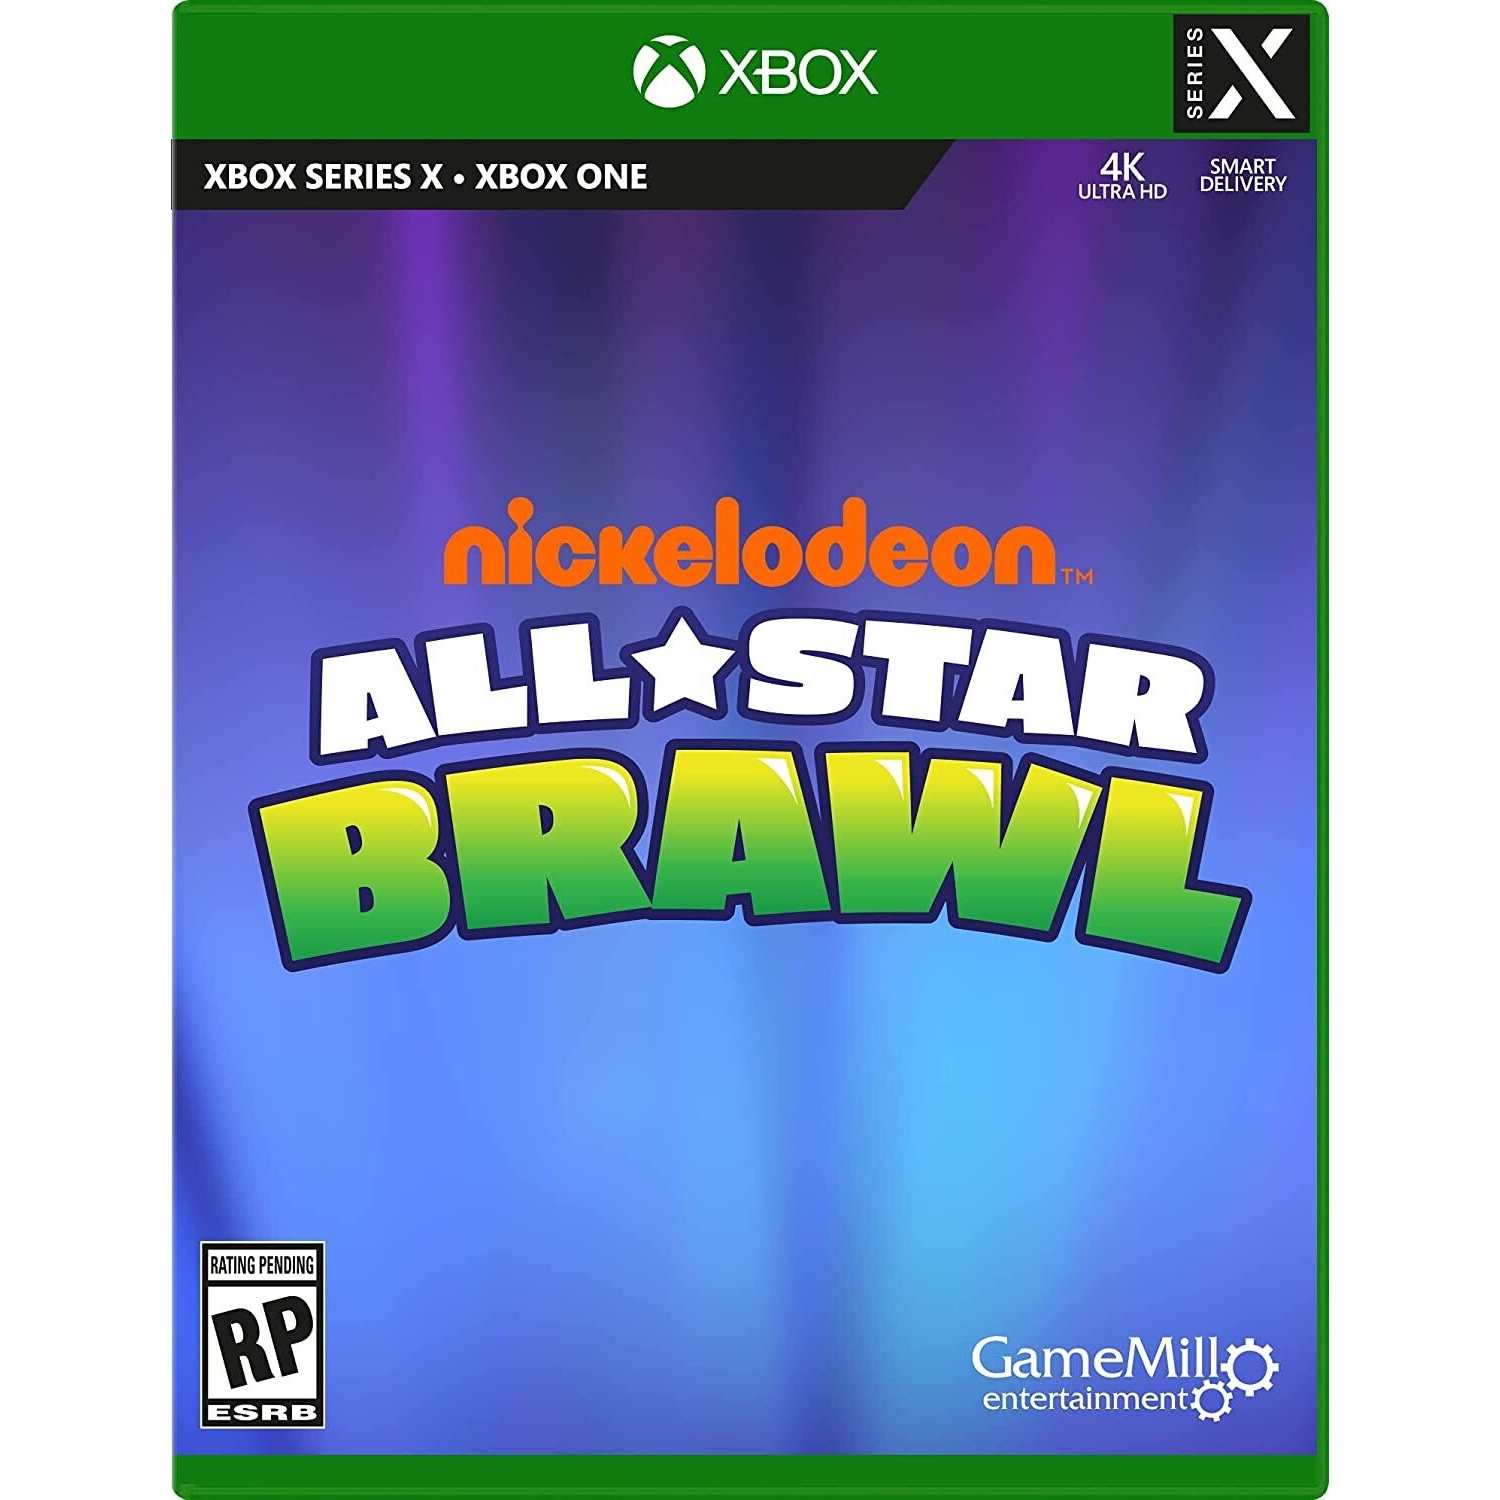 Nickelodeon All-Star Brawl for Xbox One and Xbox Series X [VIDEOGAMES] Xbox One, Xbox Series X